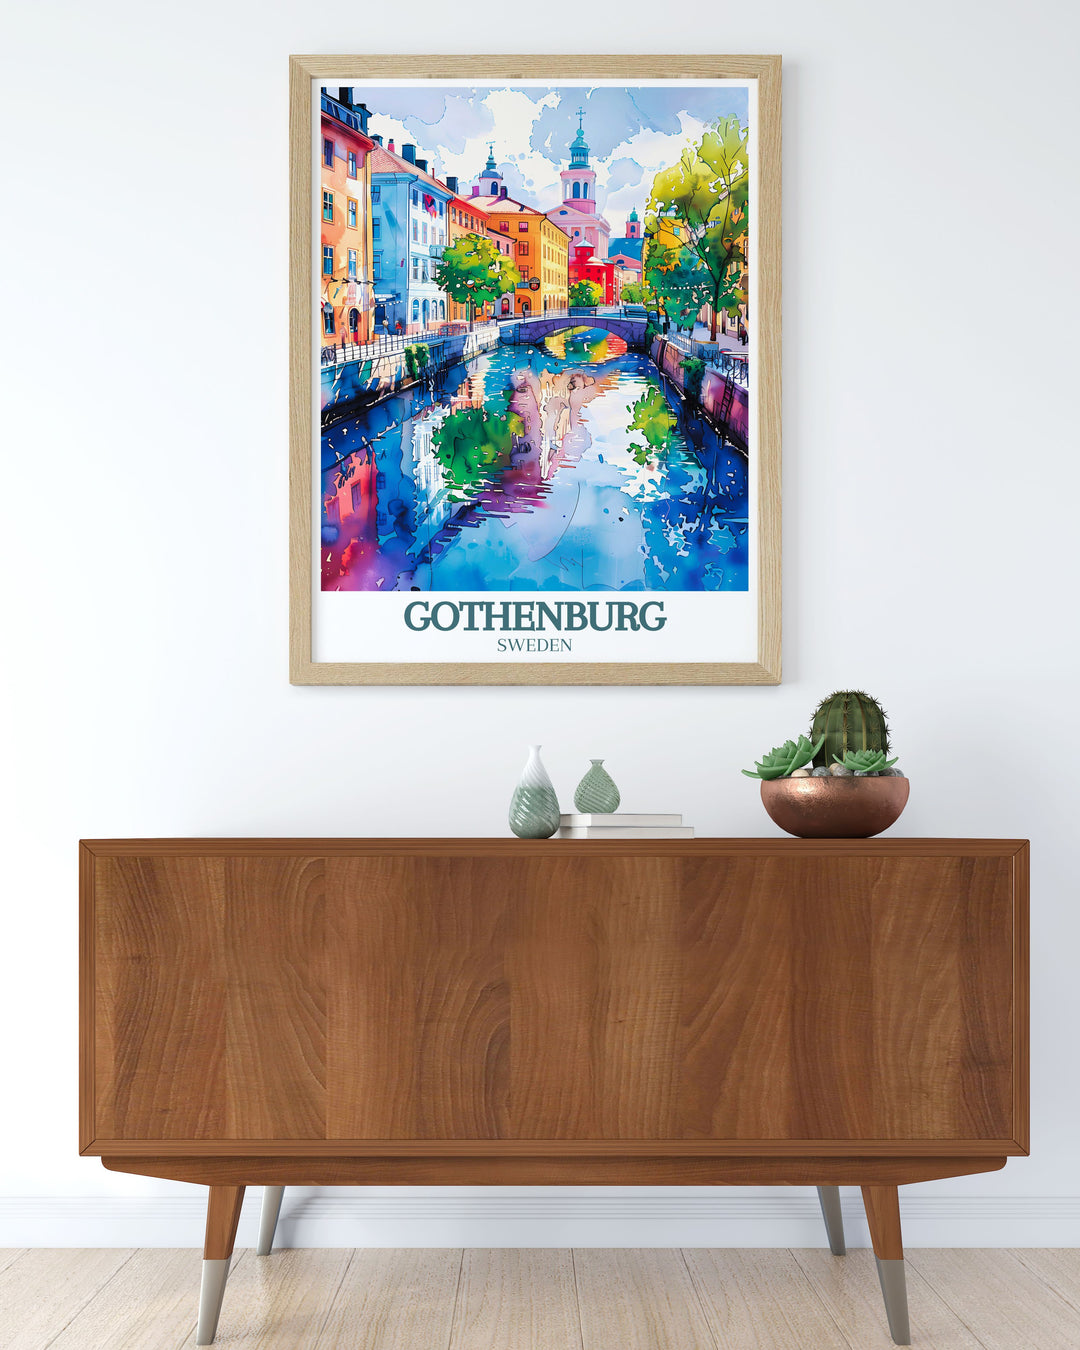 Highlighting the serene beauty of Gothenburgs canals, this travel poster captures the charm and tranquility of the citys waterways. Ideal for urban explorers and nature lovers, this artwork brings a touch of Swedish elegance to your home decor.